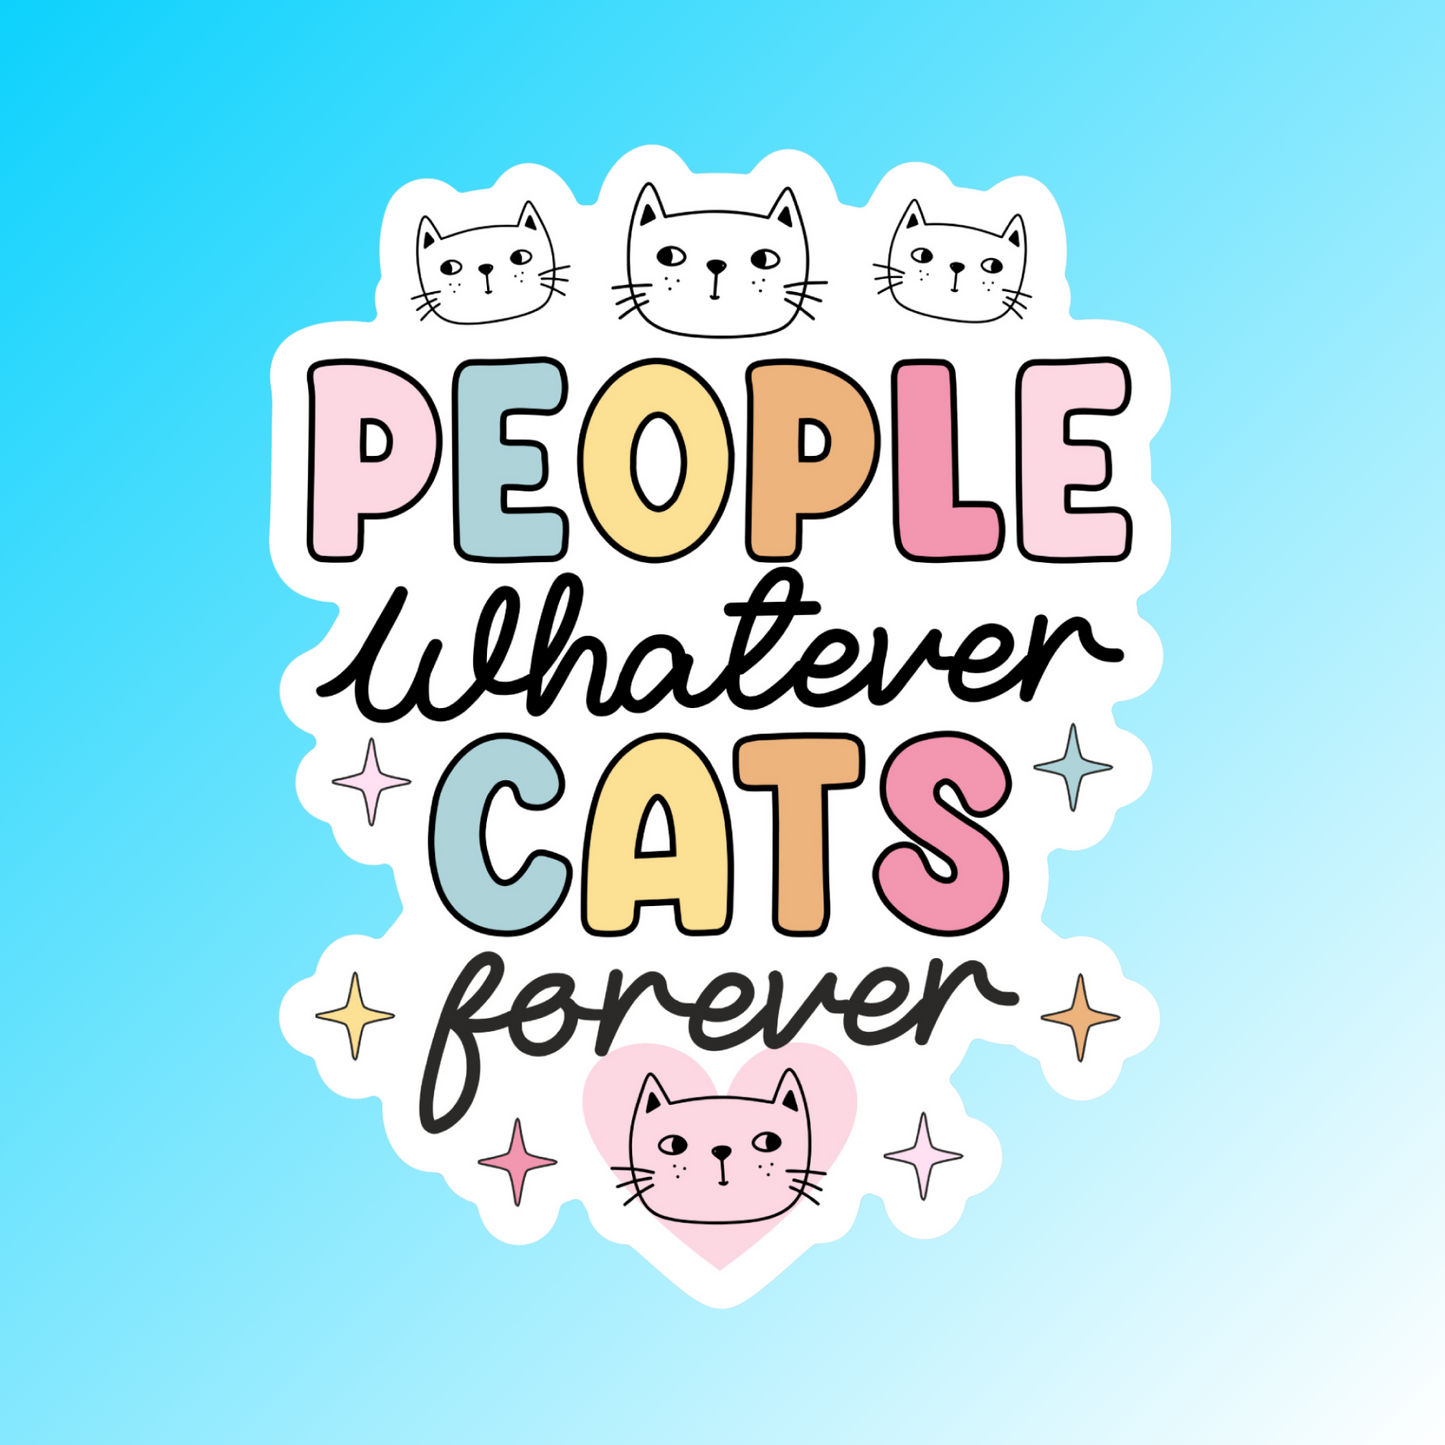 CATS FOREVER - STICKER